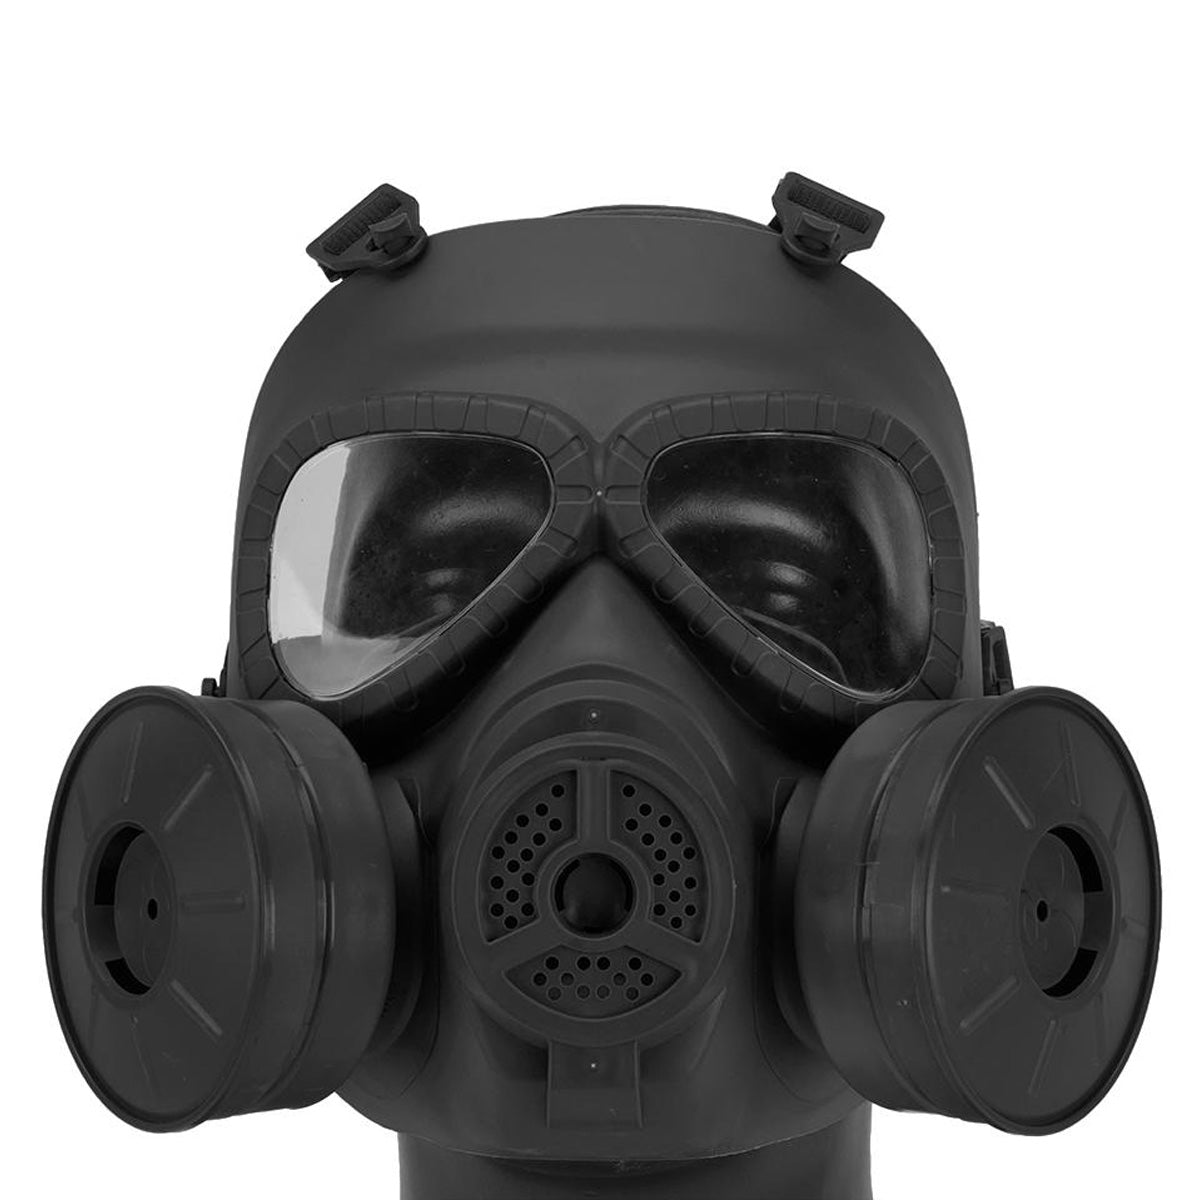 WOSPORT AIRSOFT FULL FACE GAS MASK WITH DOUBLE FILTRATION FANS